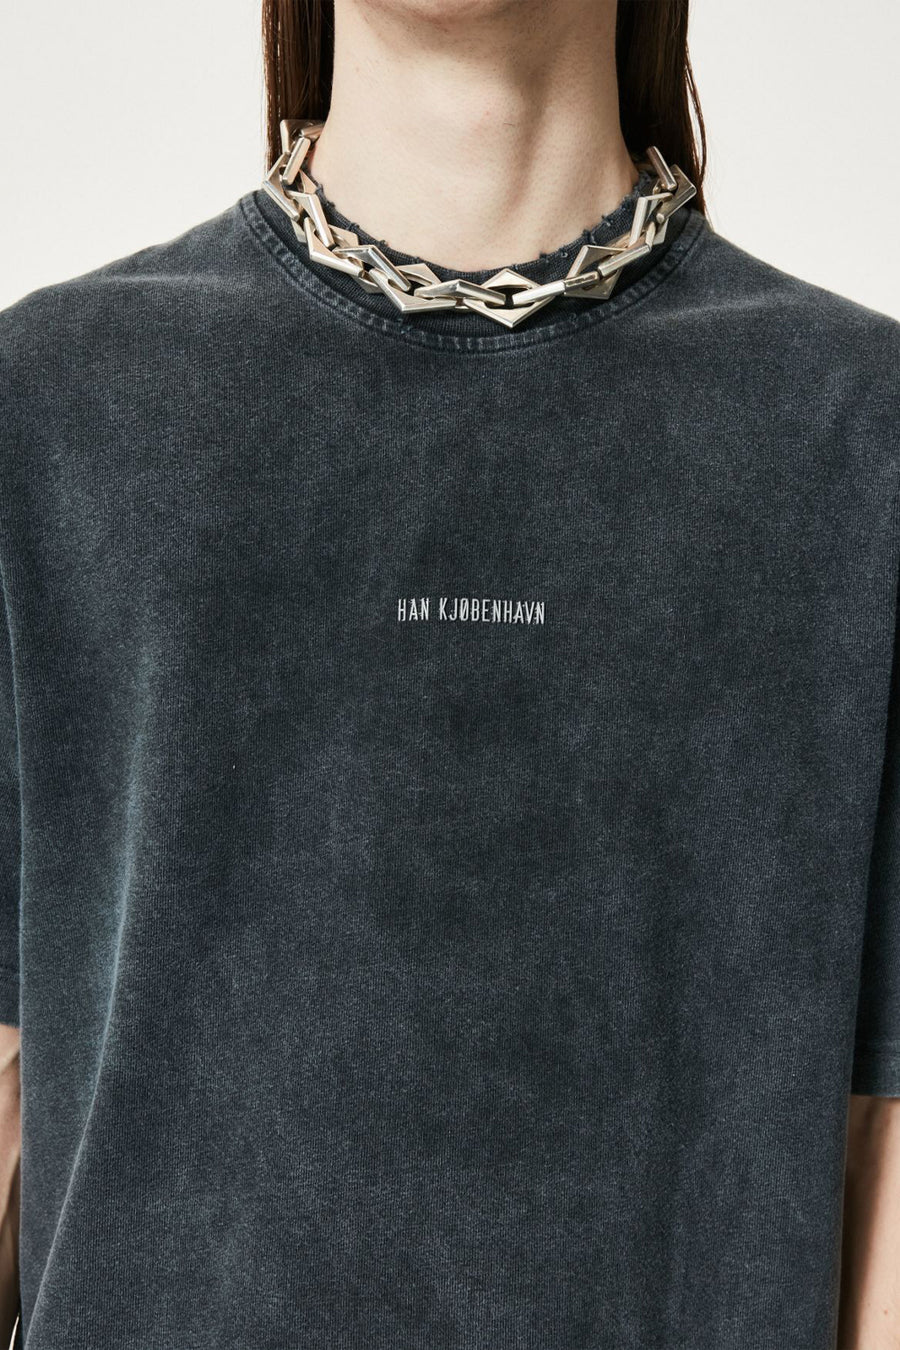 Buy the Han Kjobenhavn Distressed Logo T-Shirt in Grey at Intro. Spend £50 for free UK delivery. Official stockists. We ship worldwide.